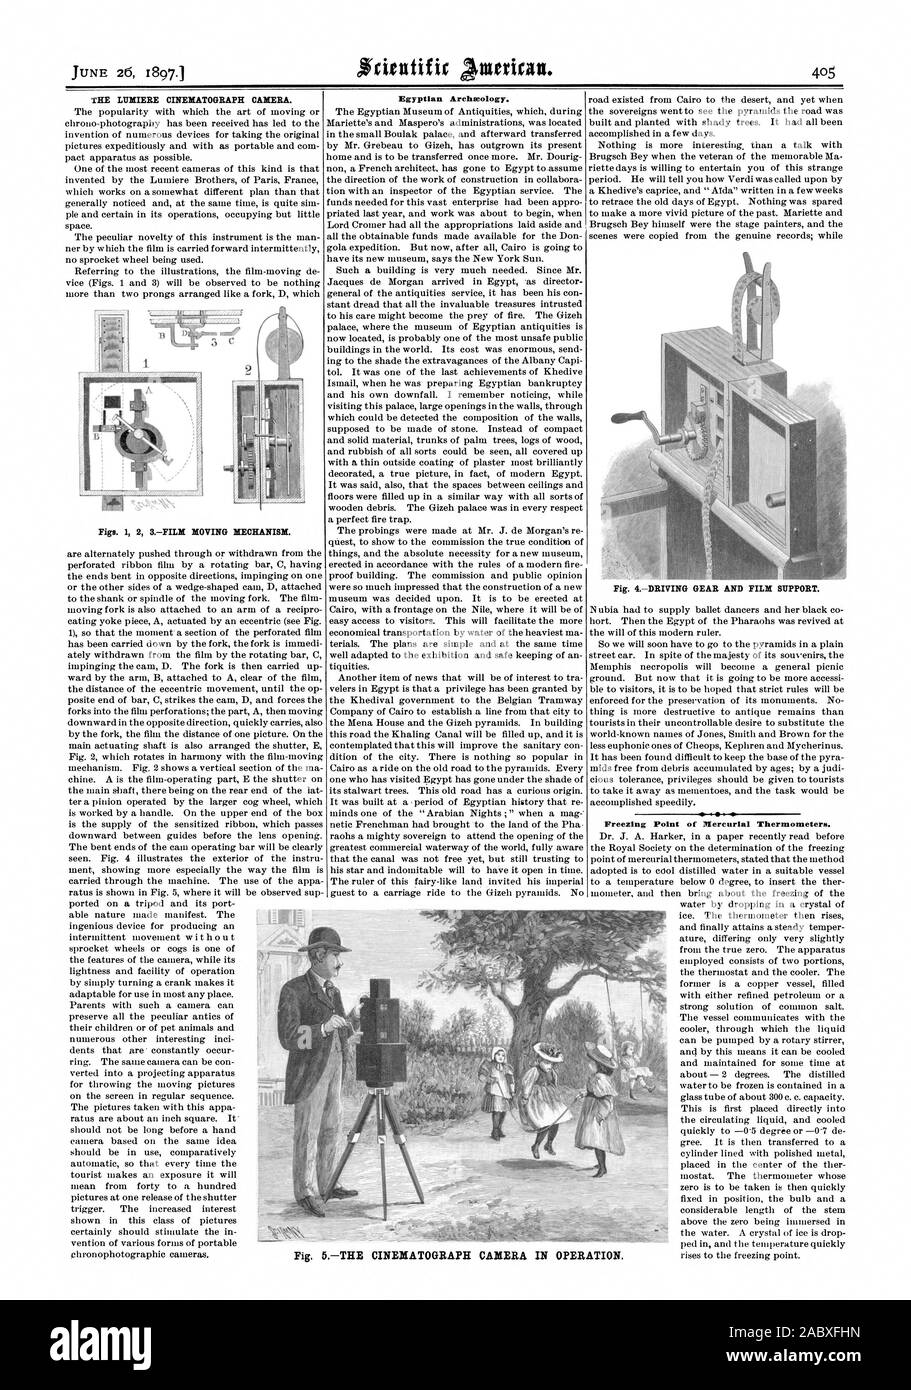 THE LUMIERE CINEMATOGRAPH CAMERA. Figs. 1 2 3FILM MOVING MECHANISM. Egyptian Archteology. Freezing Point of Mercurial Thermometers. Fig. 5THE CINEMATOGRAPH CAMERA IN OPERATION, scientific american, 1897-06-26 Stock Photo